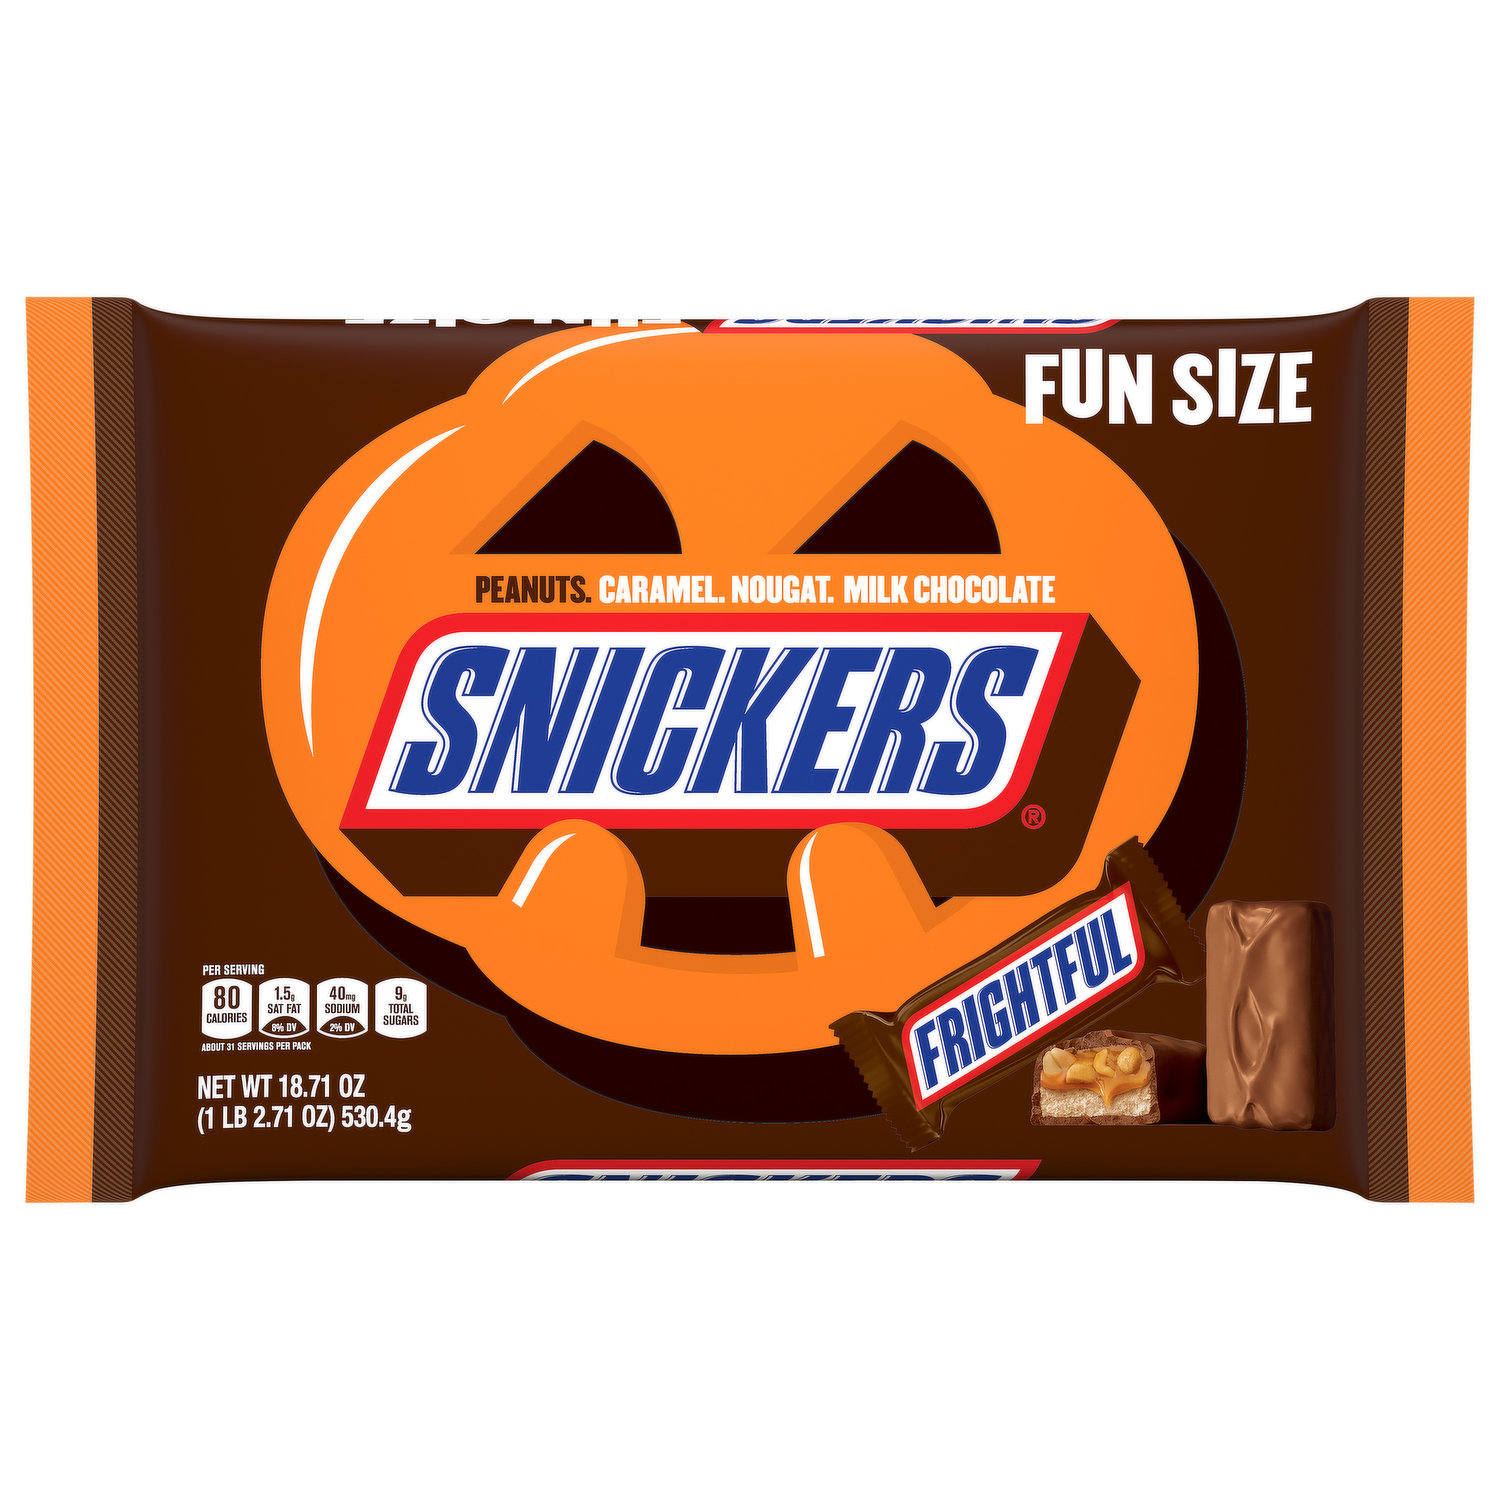 Snickers Fun Size Chocolate Bars Variety Pack - 10.36 oz packet